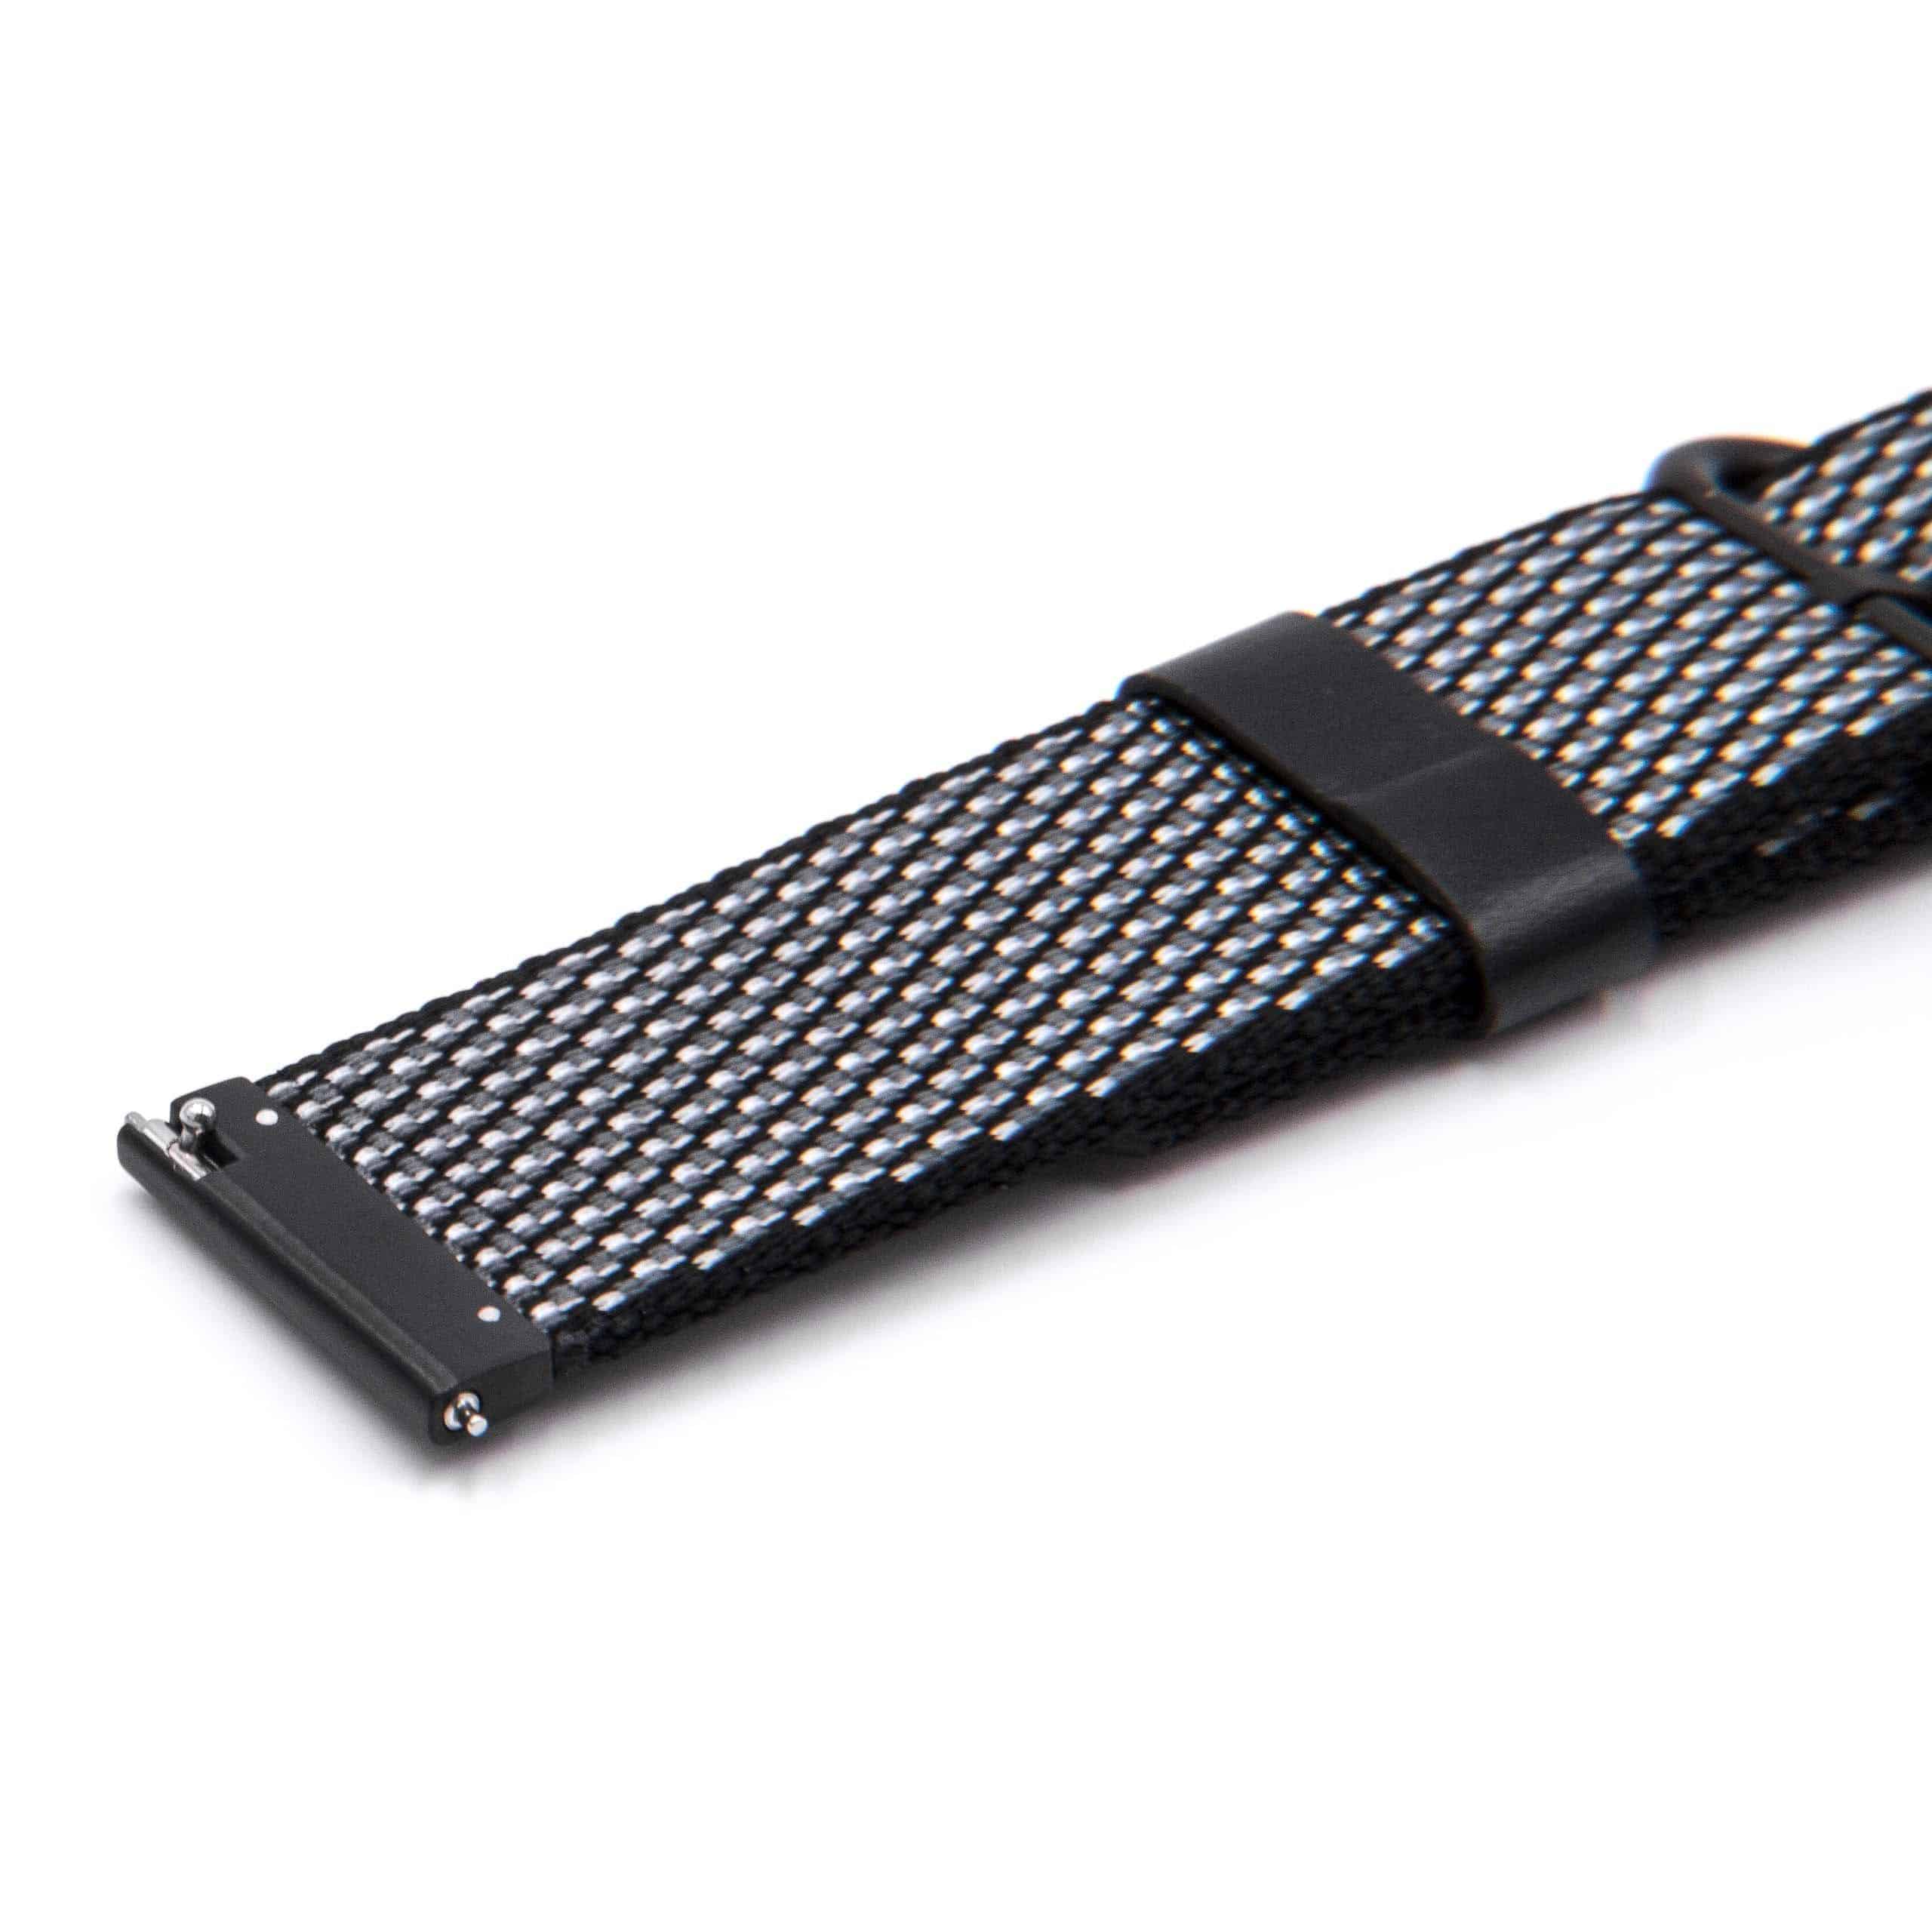 wristband for Asus ZenWatch Smartwatch etc. - 12.3cm + 8.5 cm long, 22mm wide, nylon, black, white